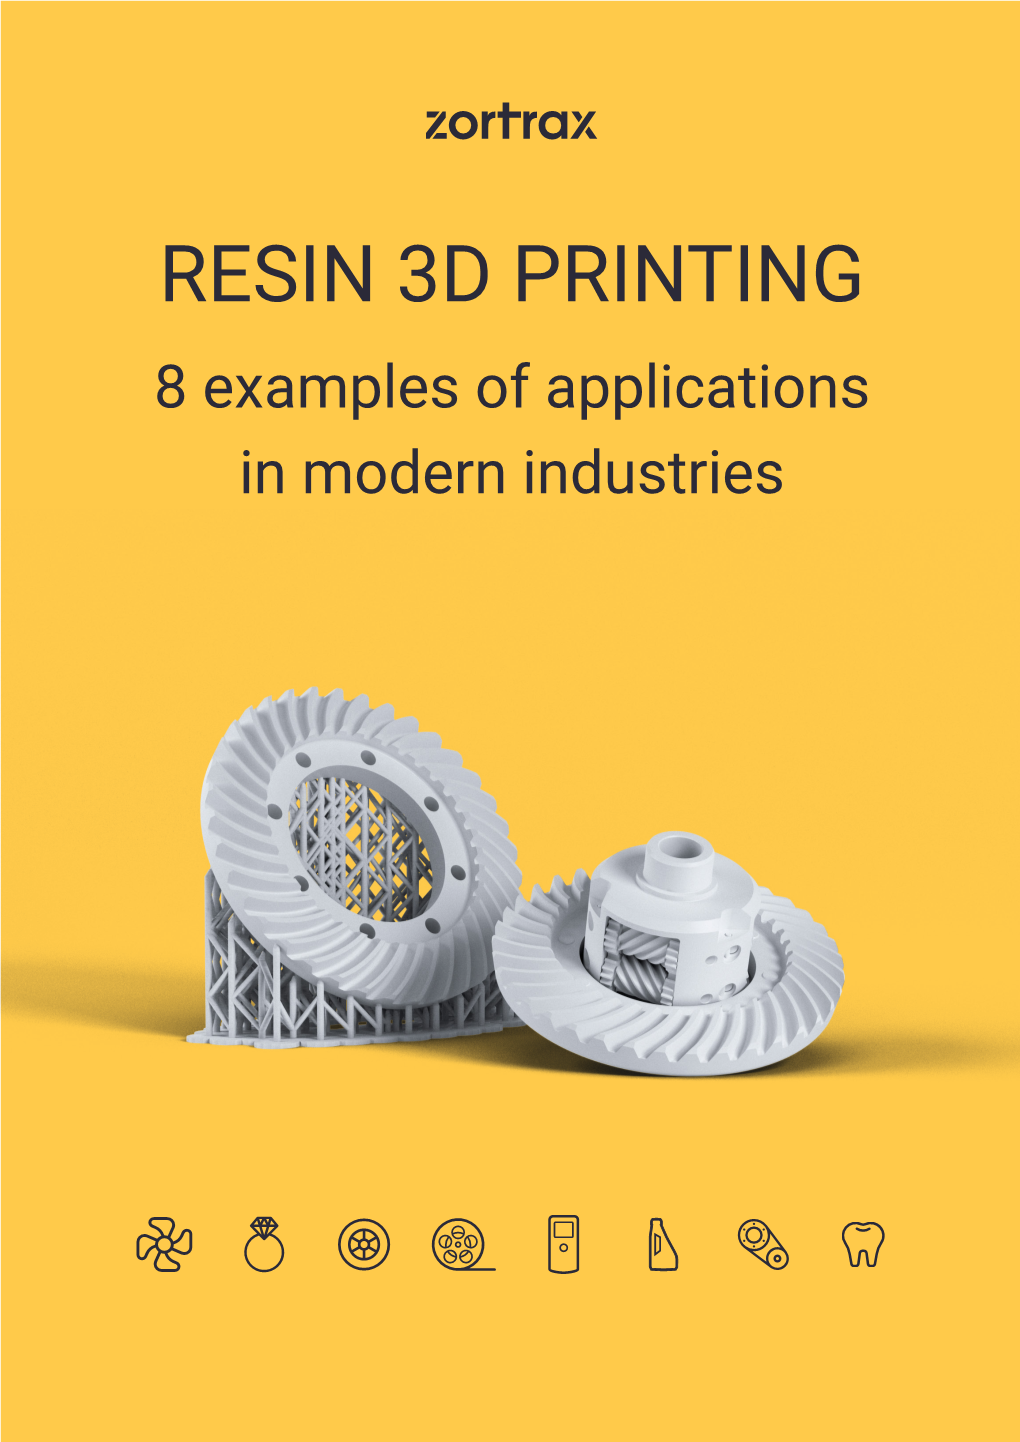 RESIN 3D PRINTING 8 Examples of Applications in Modern Industries Introduction About 3D Printing the Evolution of 3D Printing